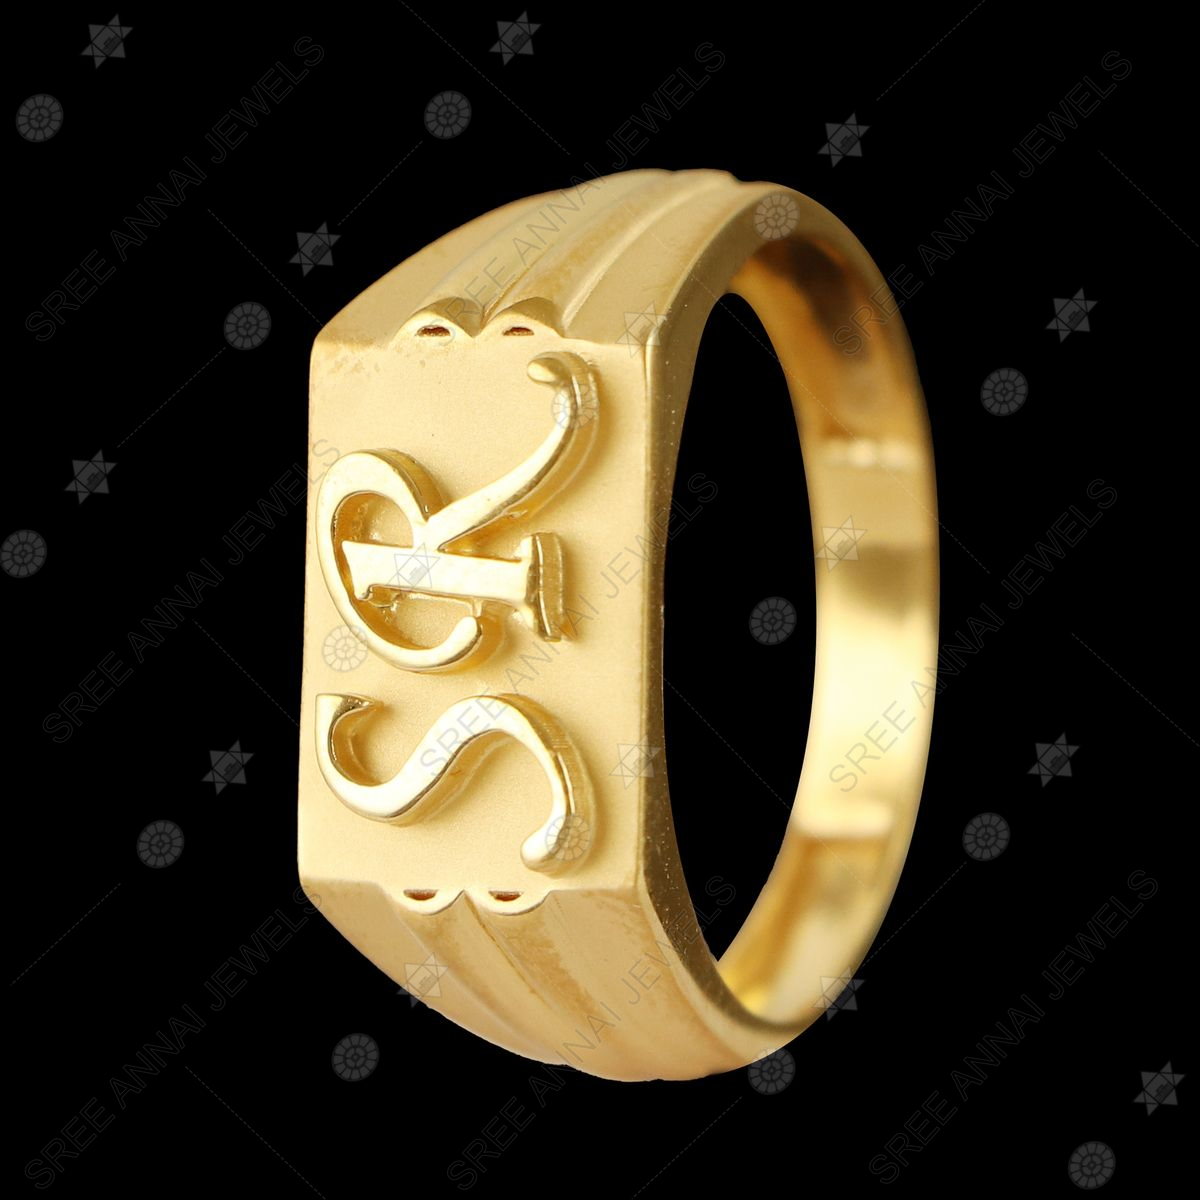 Best Sellers: Gold Ring Designs and Fashion Jewelry